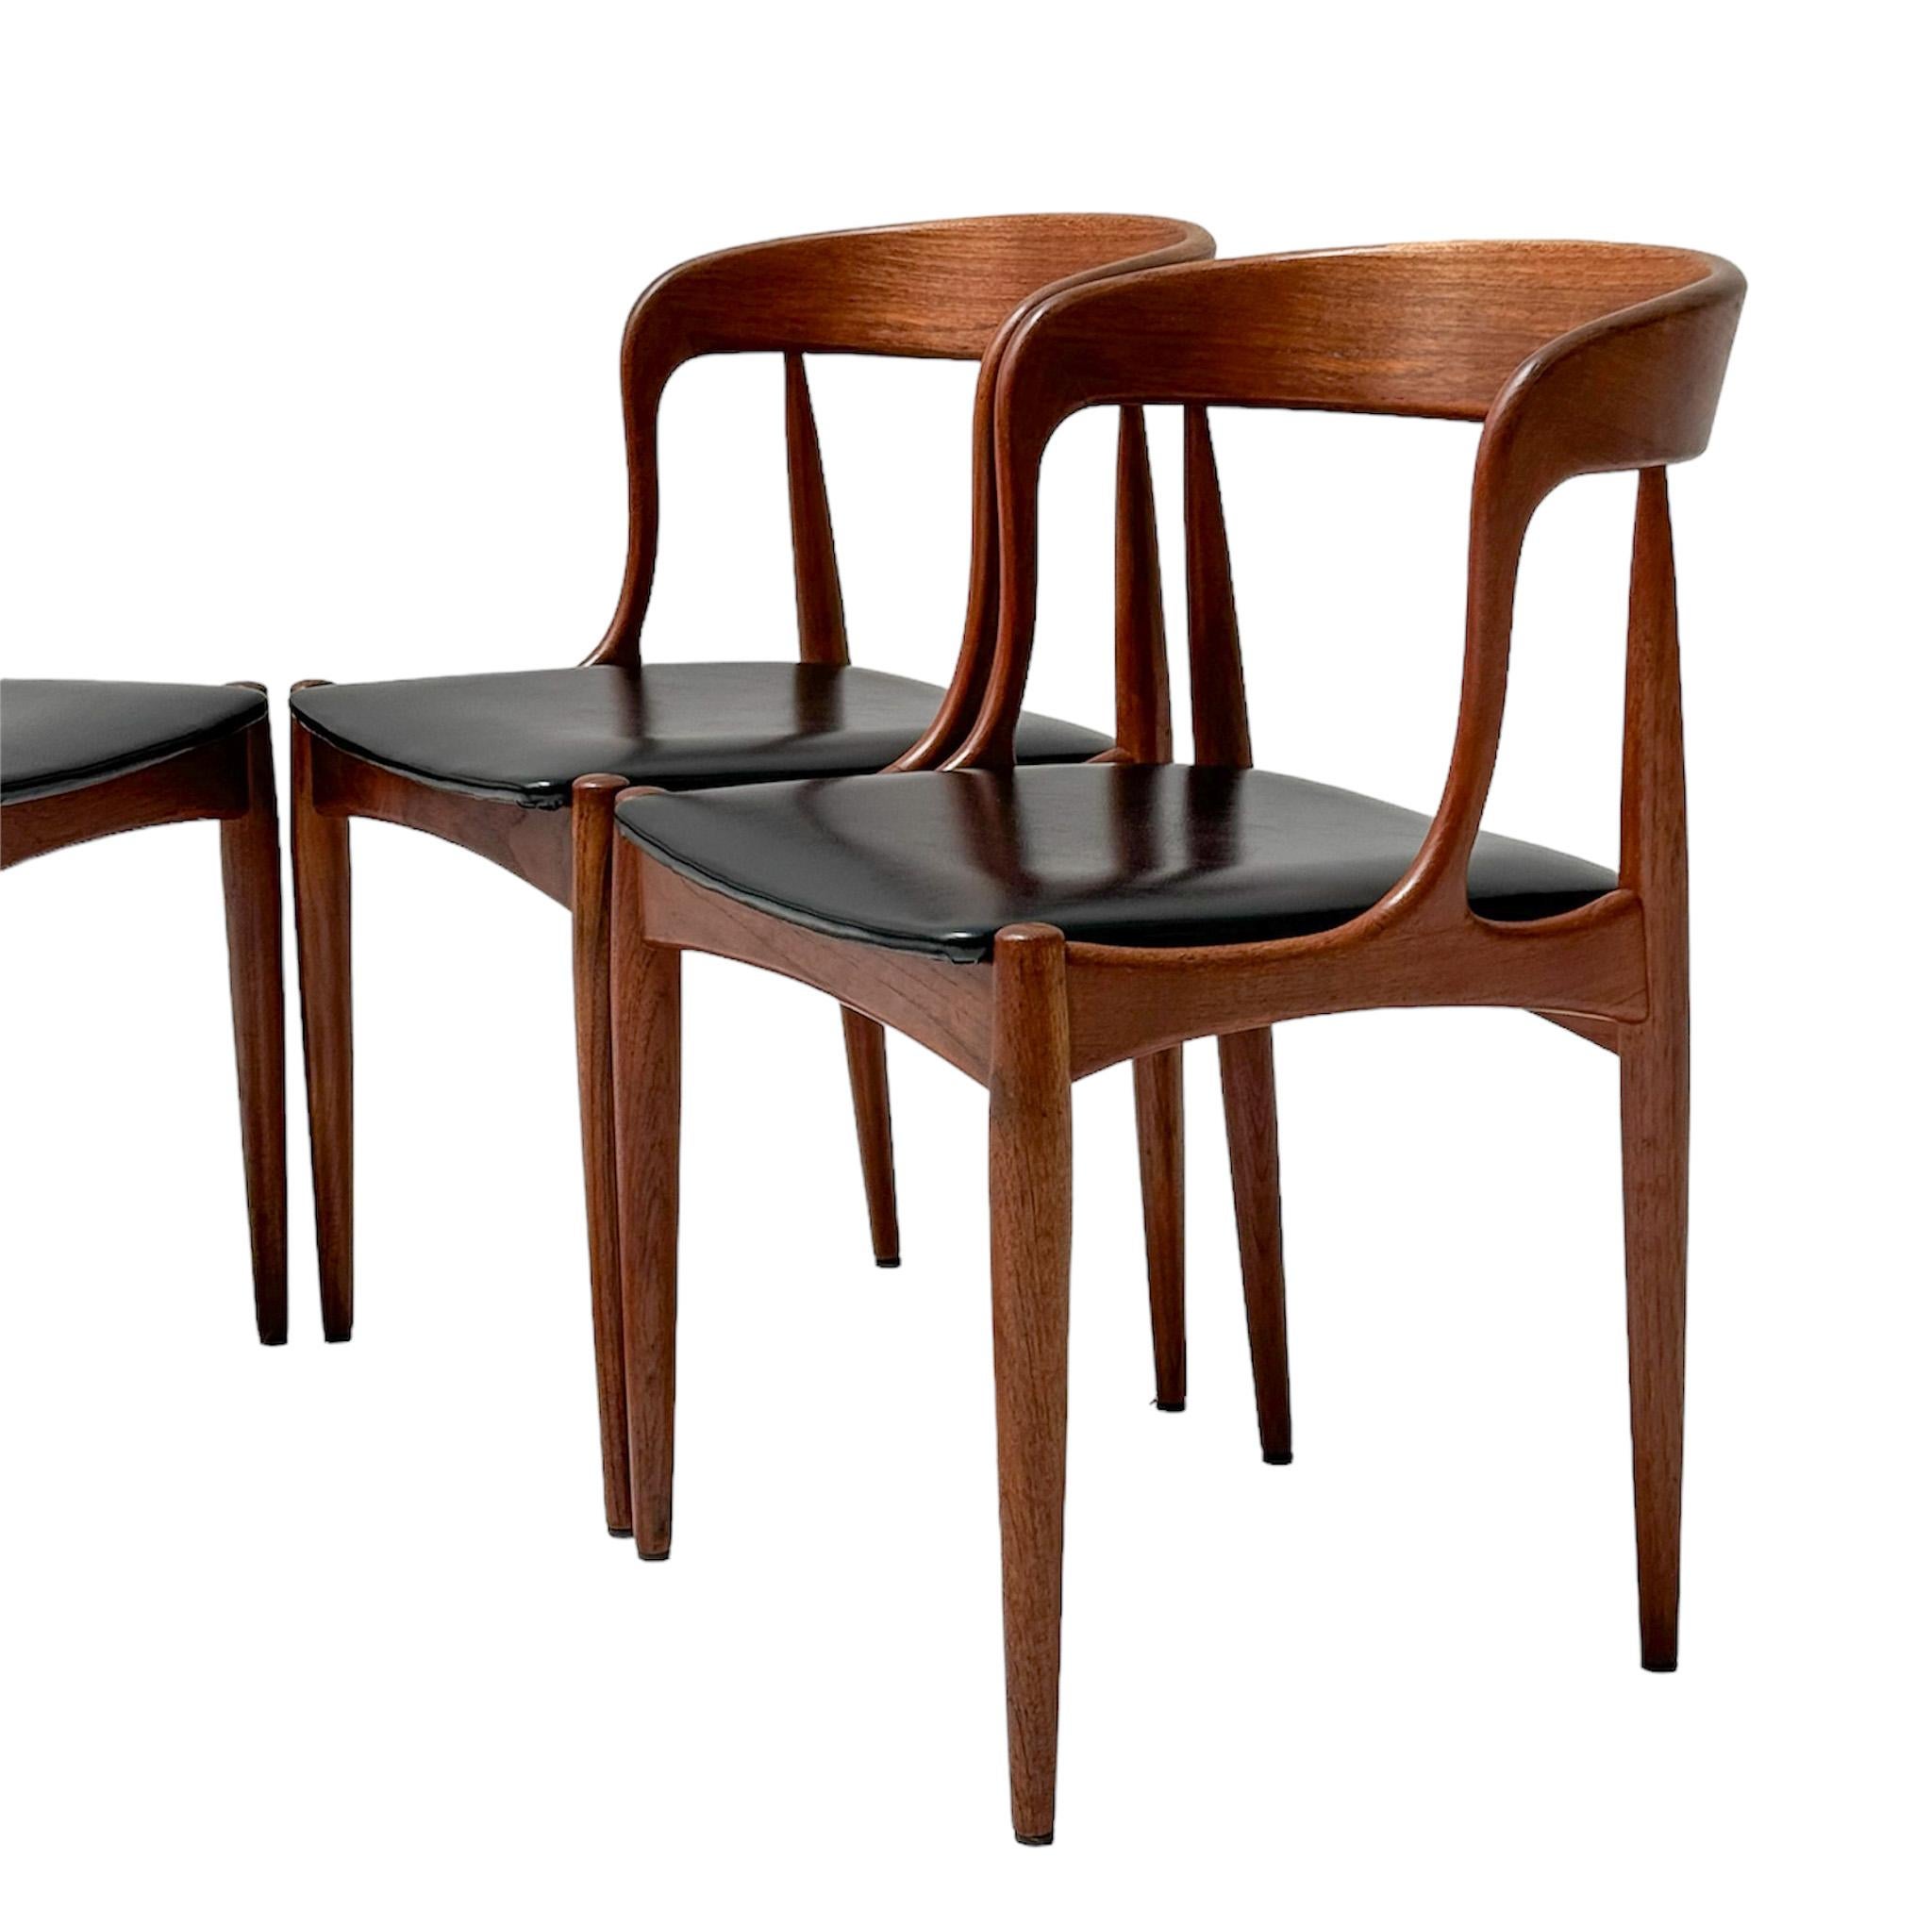 Faux Leather Four Teak Mid-Century Modern Dining Chairs by Johannes Andersen for Uldum, 1960s For Sale